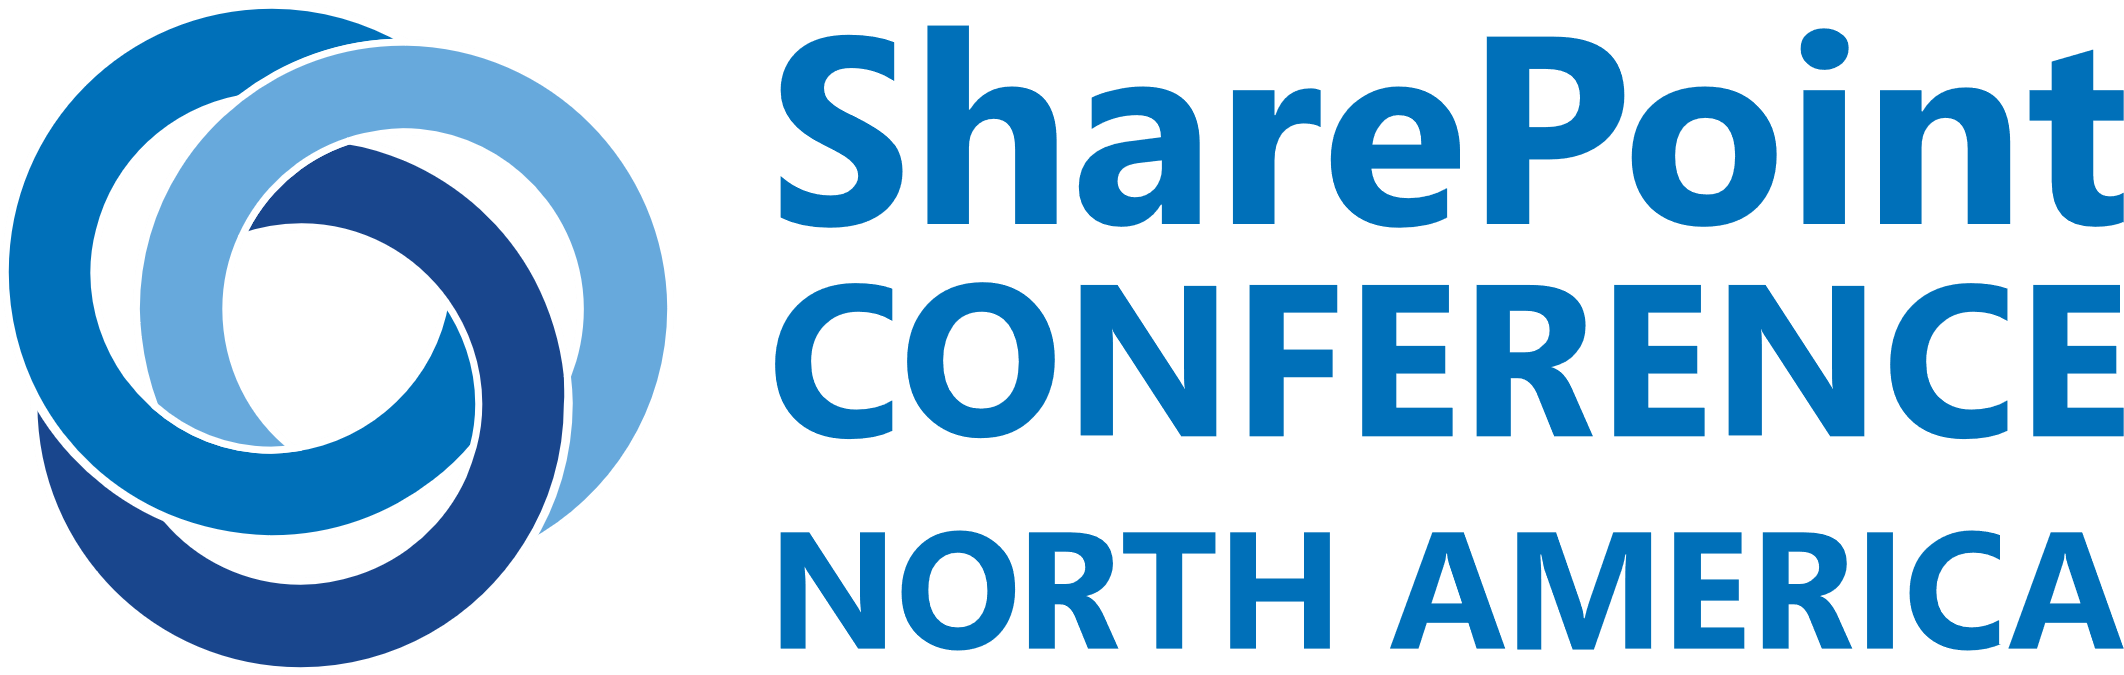 Speaking At Sharepoint Conference North America - Sharepoint Conference North America (2160x1222)